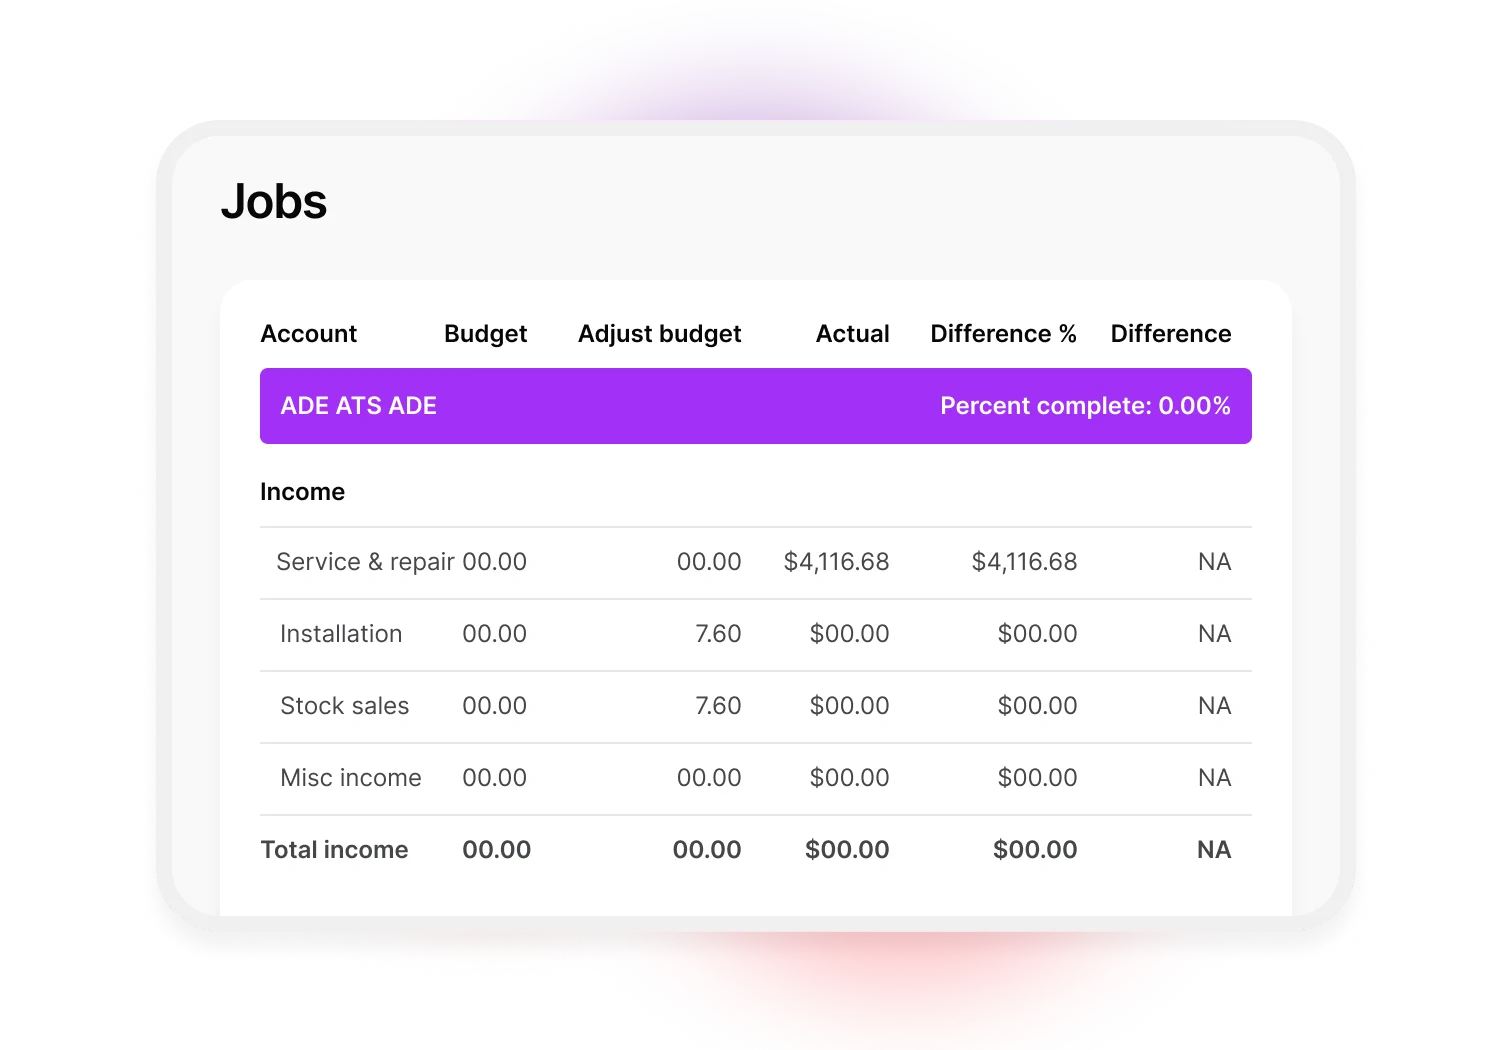 An example of the detailed job reporting available in MYOB Business AccountRight Plus and Premier. The report shows a table with the following details: account, budget, adjusted budget, actual spend, difference in percentage and difference in dollars. There's also a progress bar along the top to show the percentage of the job that is complete.